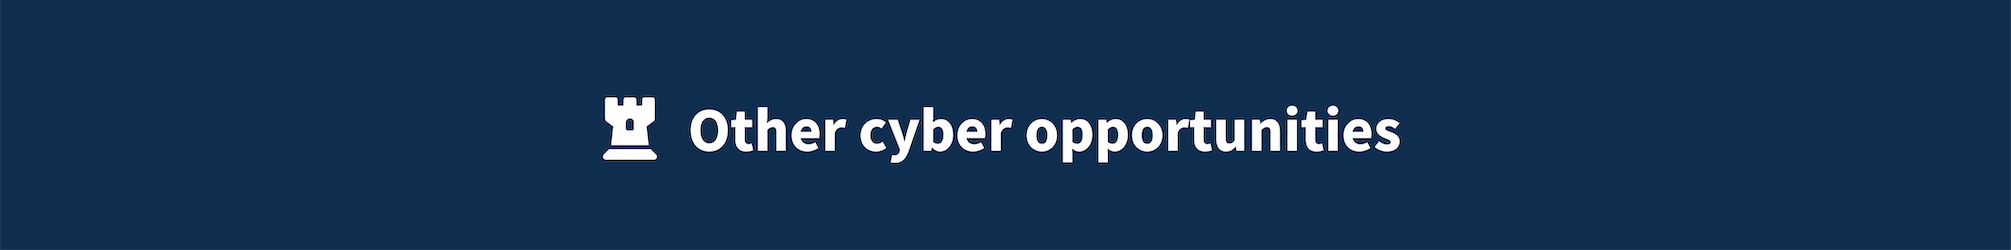 Other cyber opportunities